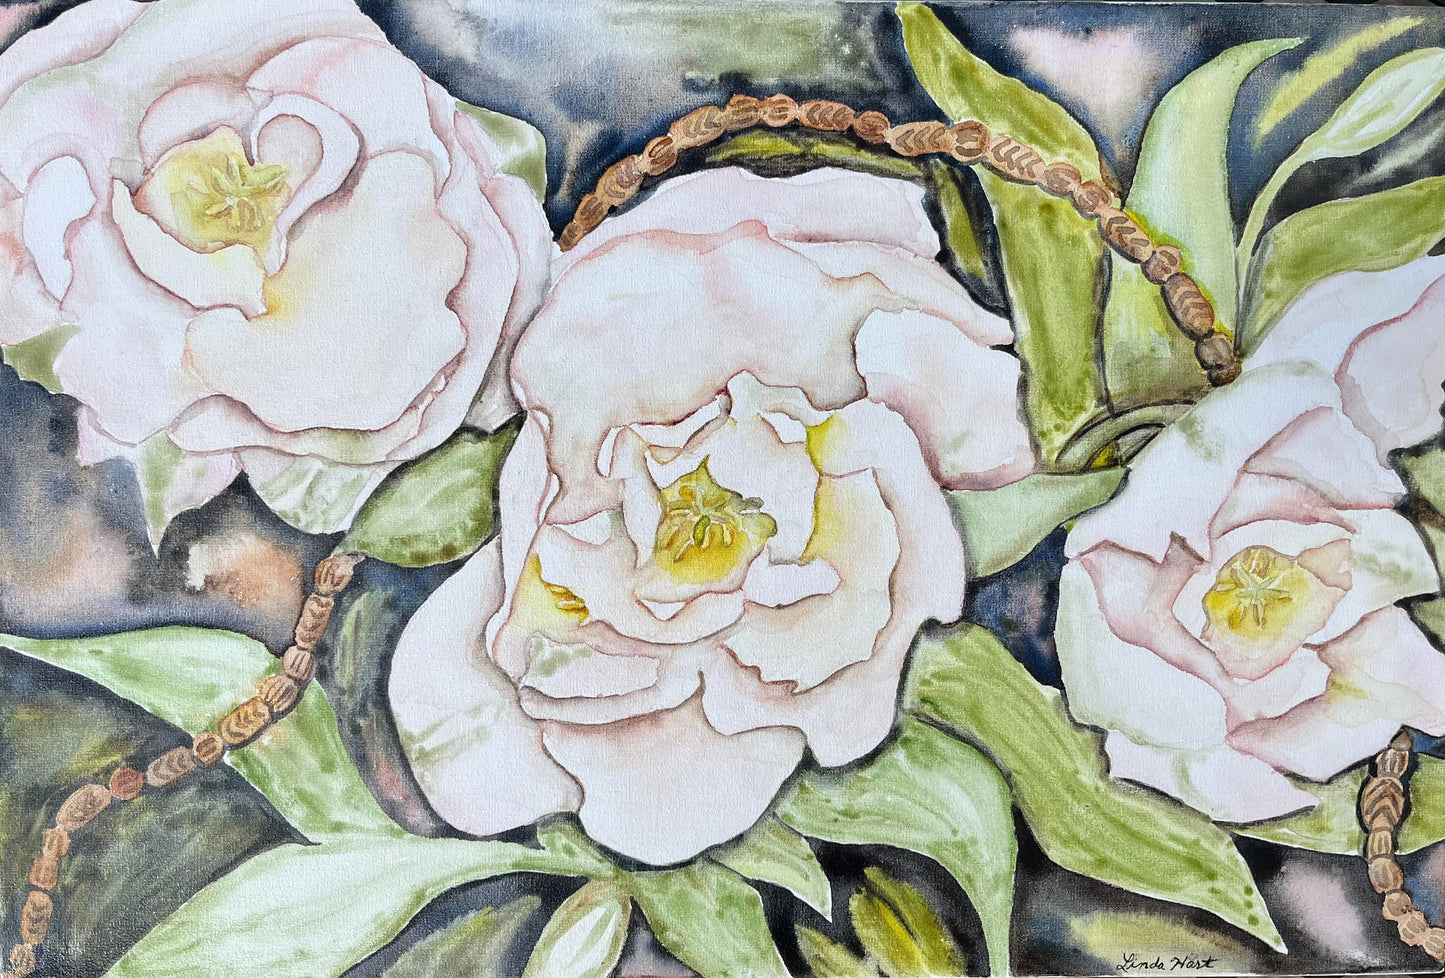 Peony Tulips - 18" x 12" x 1.5" - Original Watercolor Painting on Gallery Wrapped Canvas